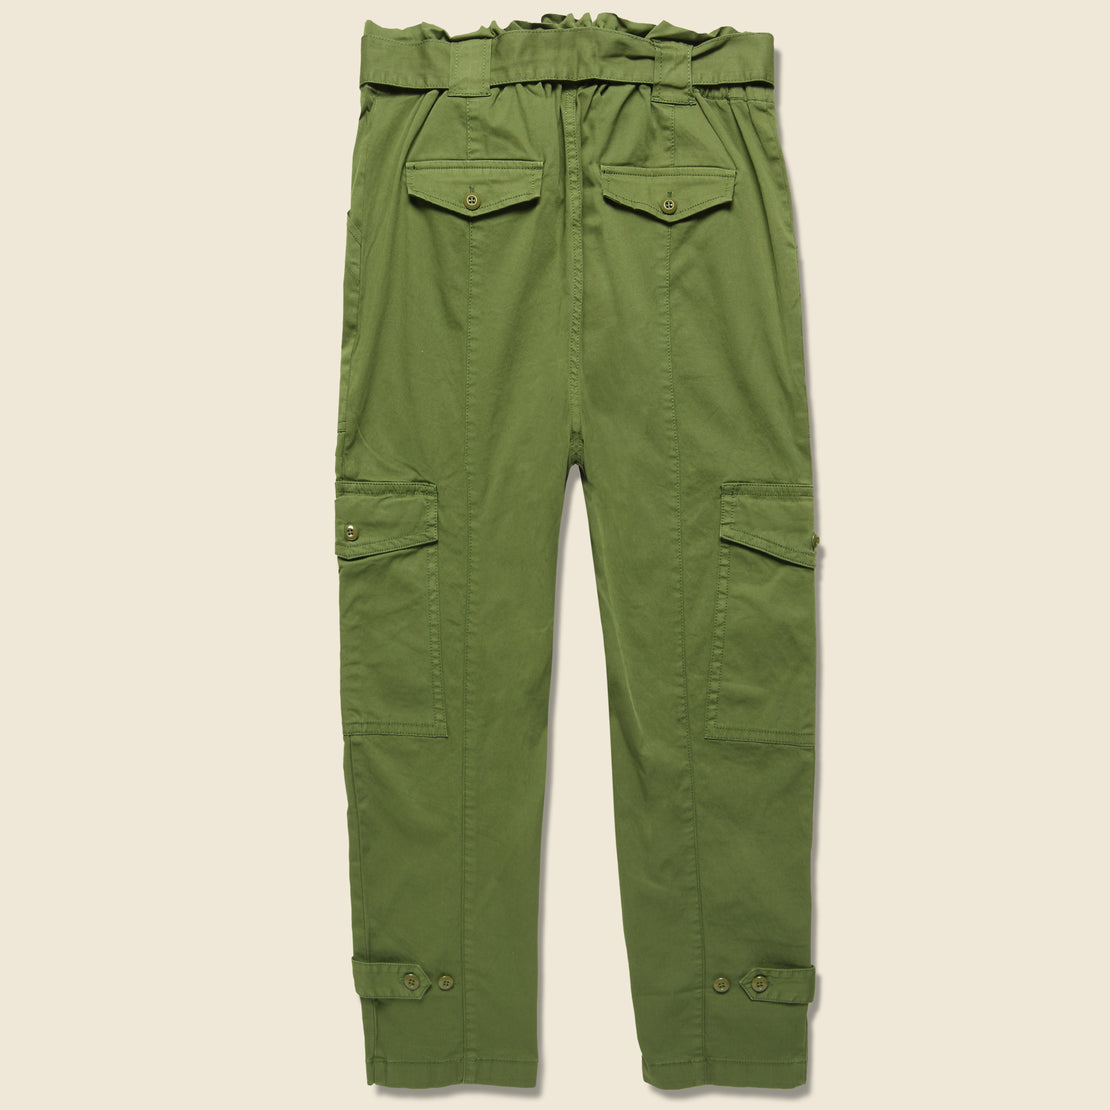 Expedition Pant - Army Olive